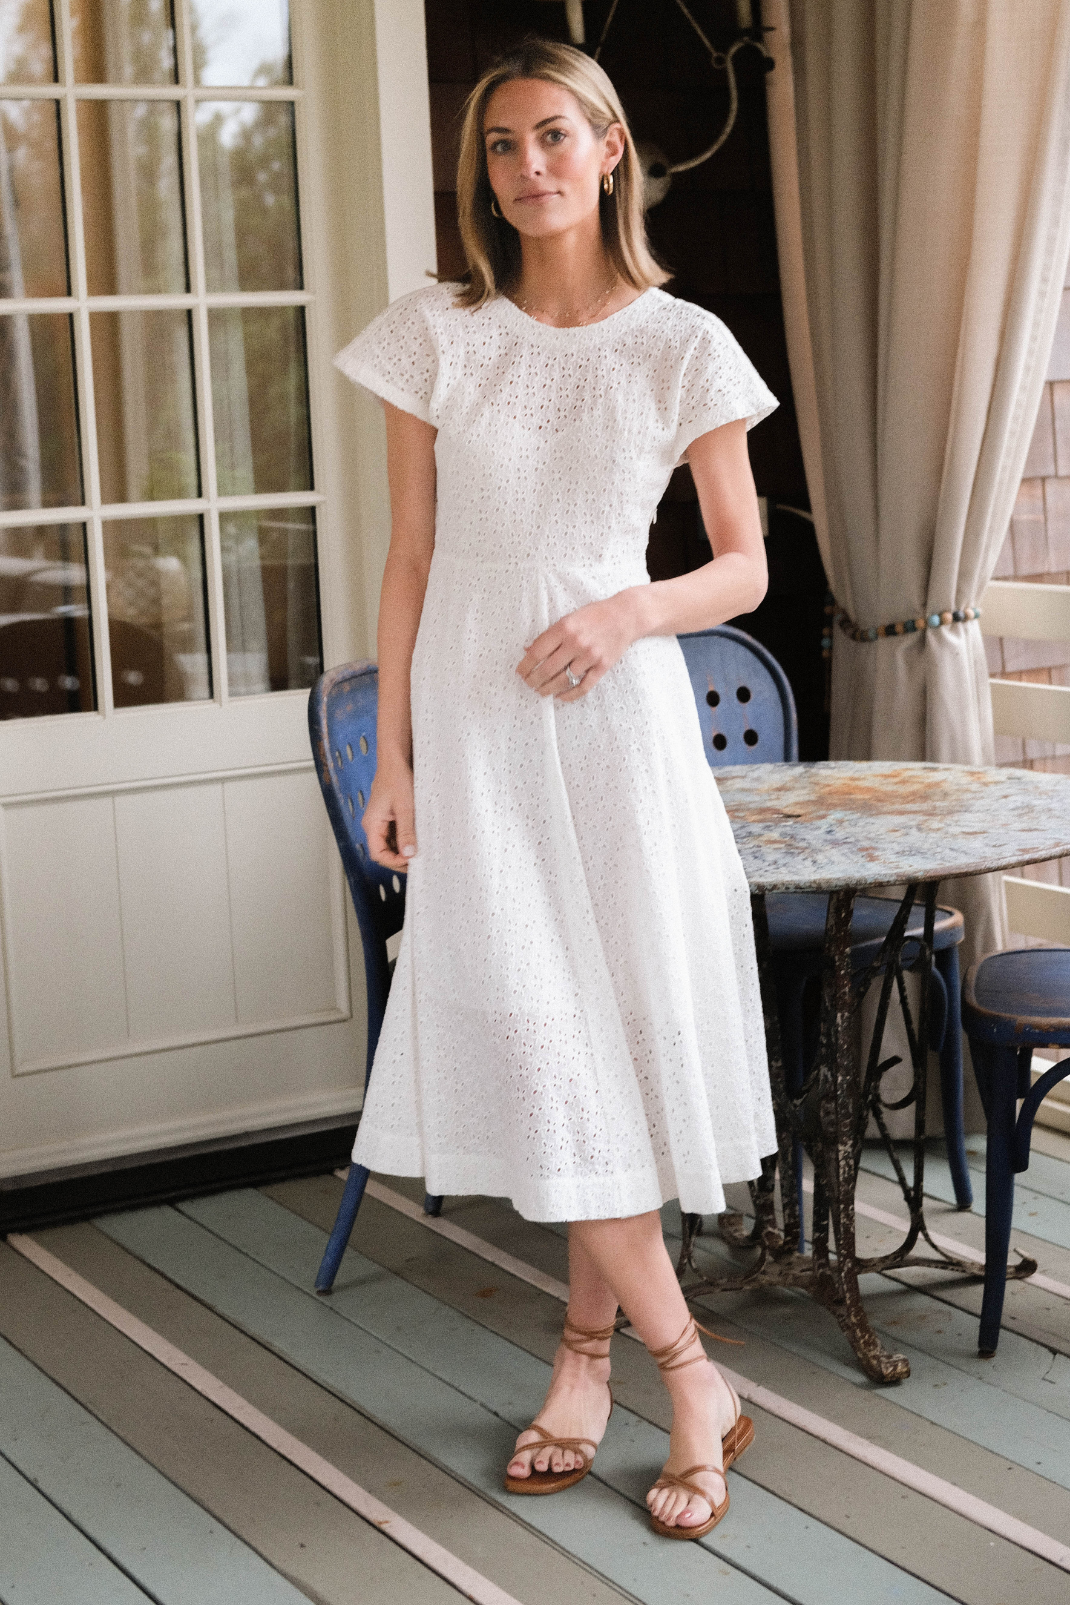 Woman standing in white eyelet dress